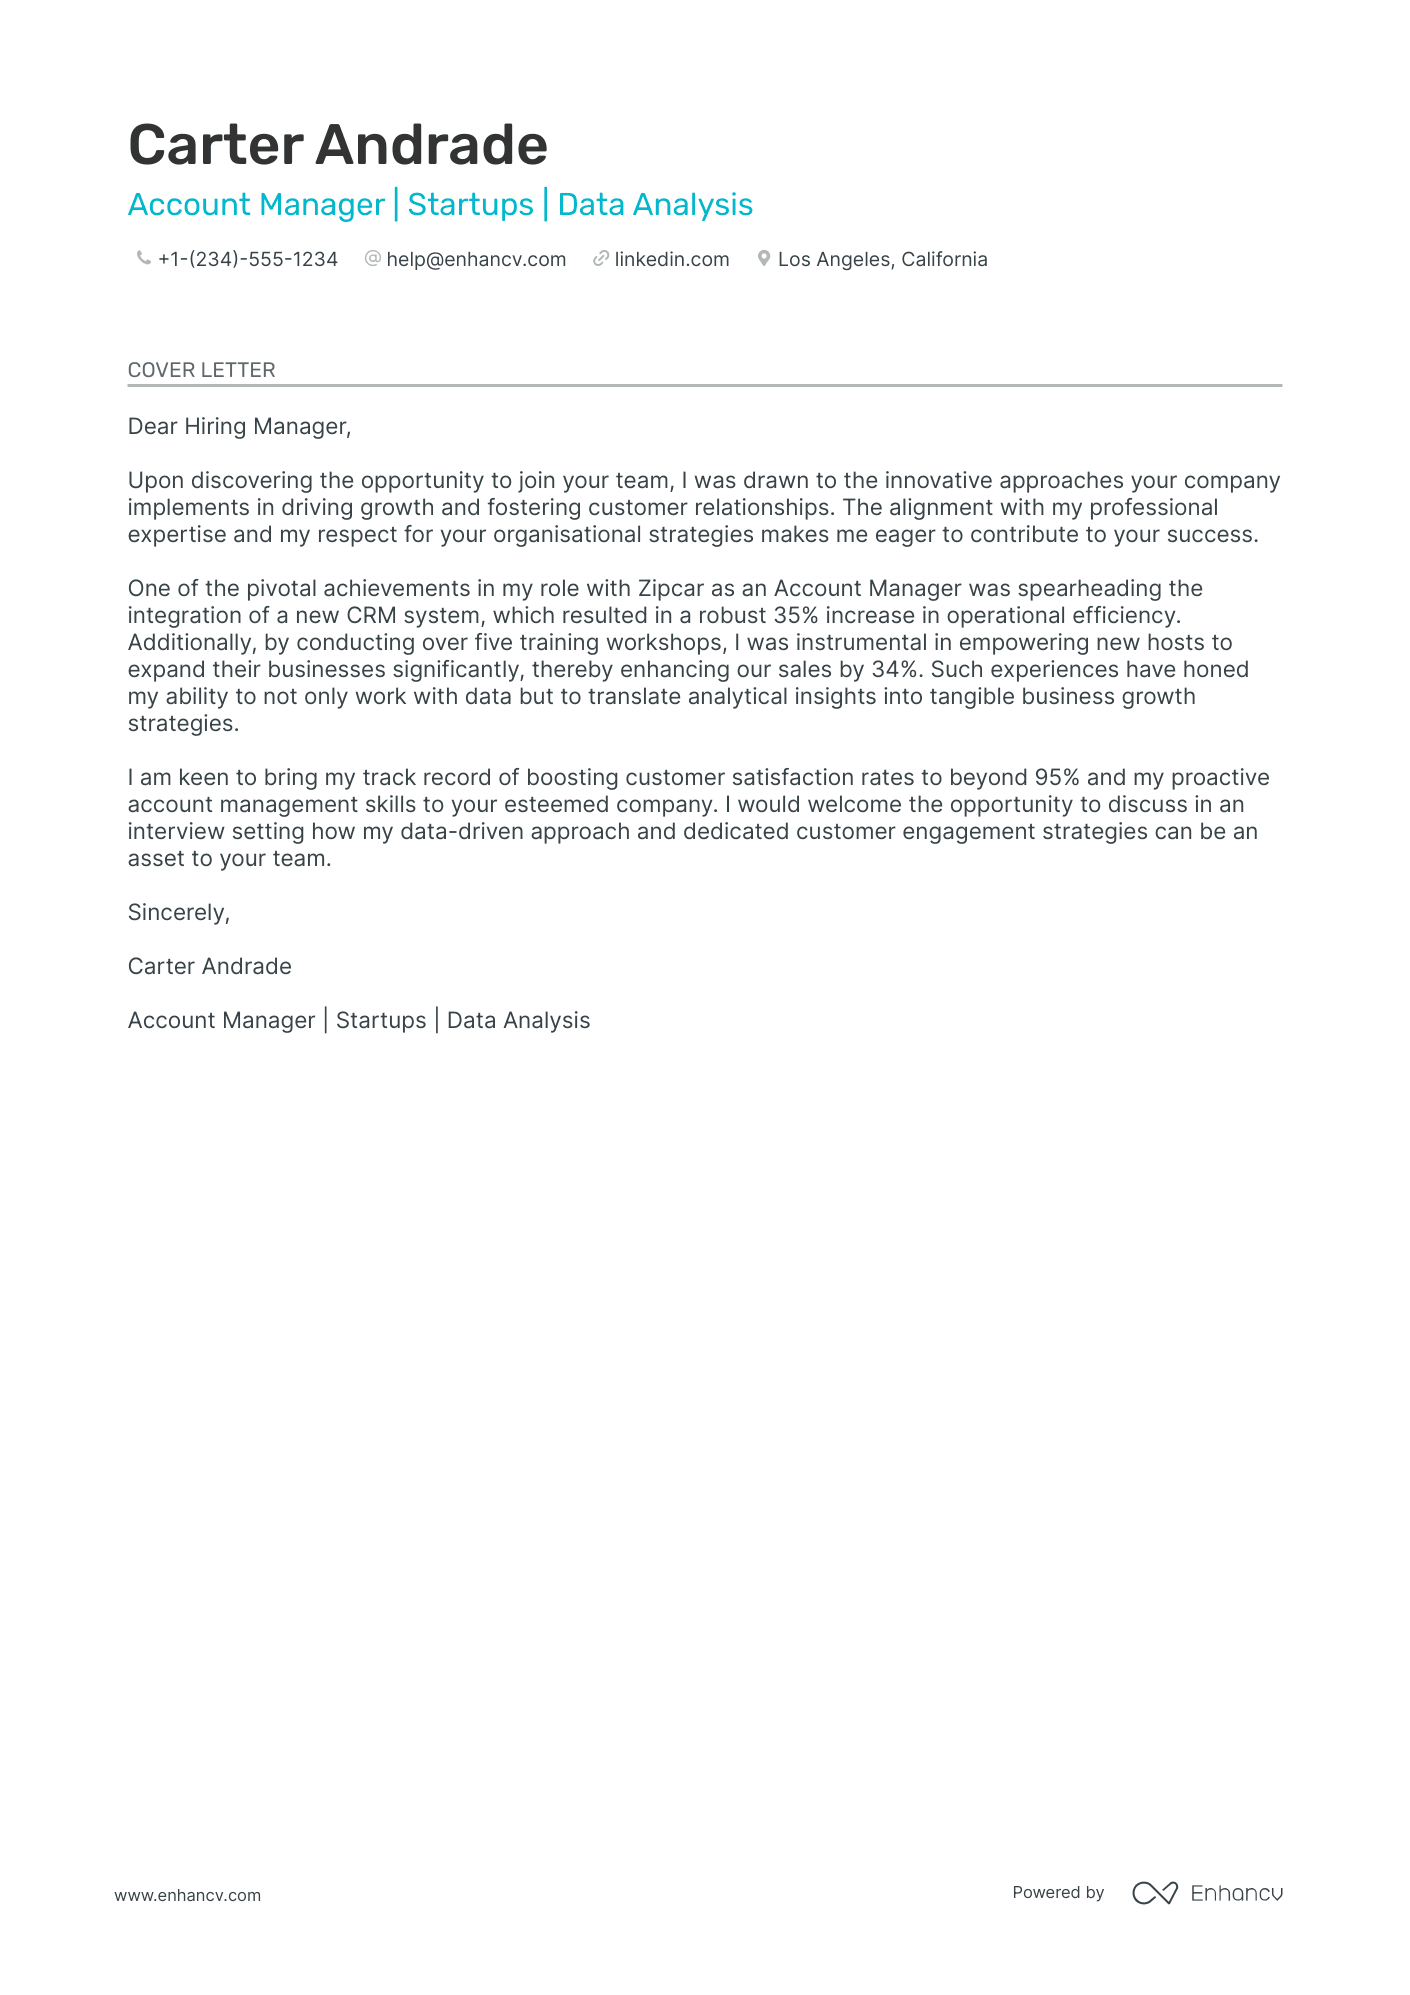 cover letter in sales and customer service